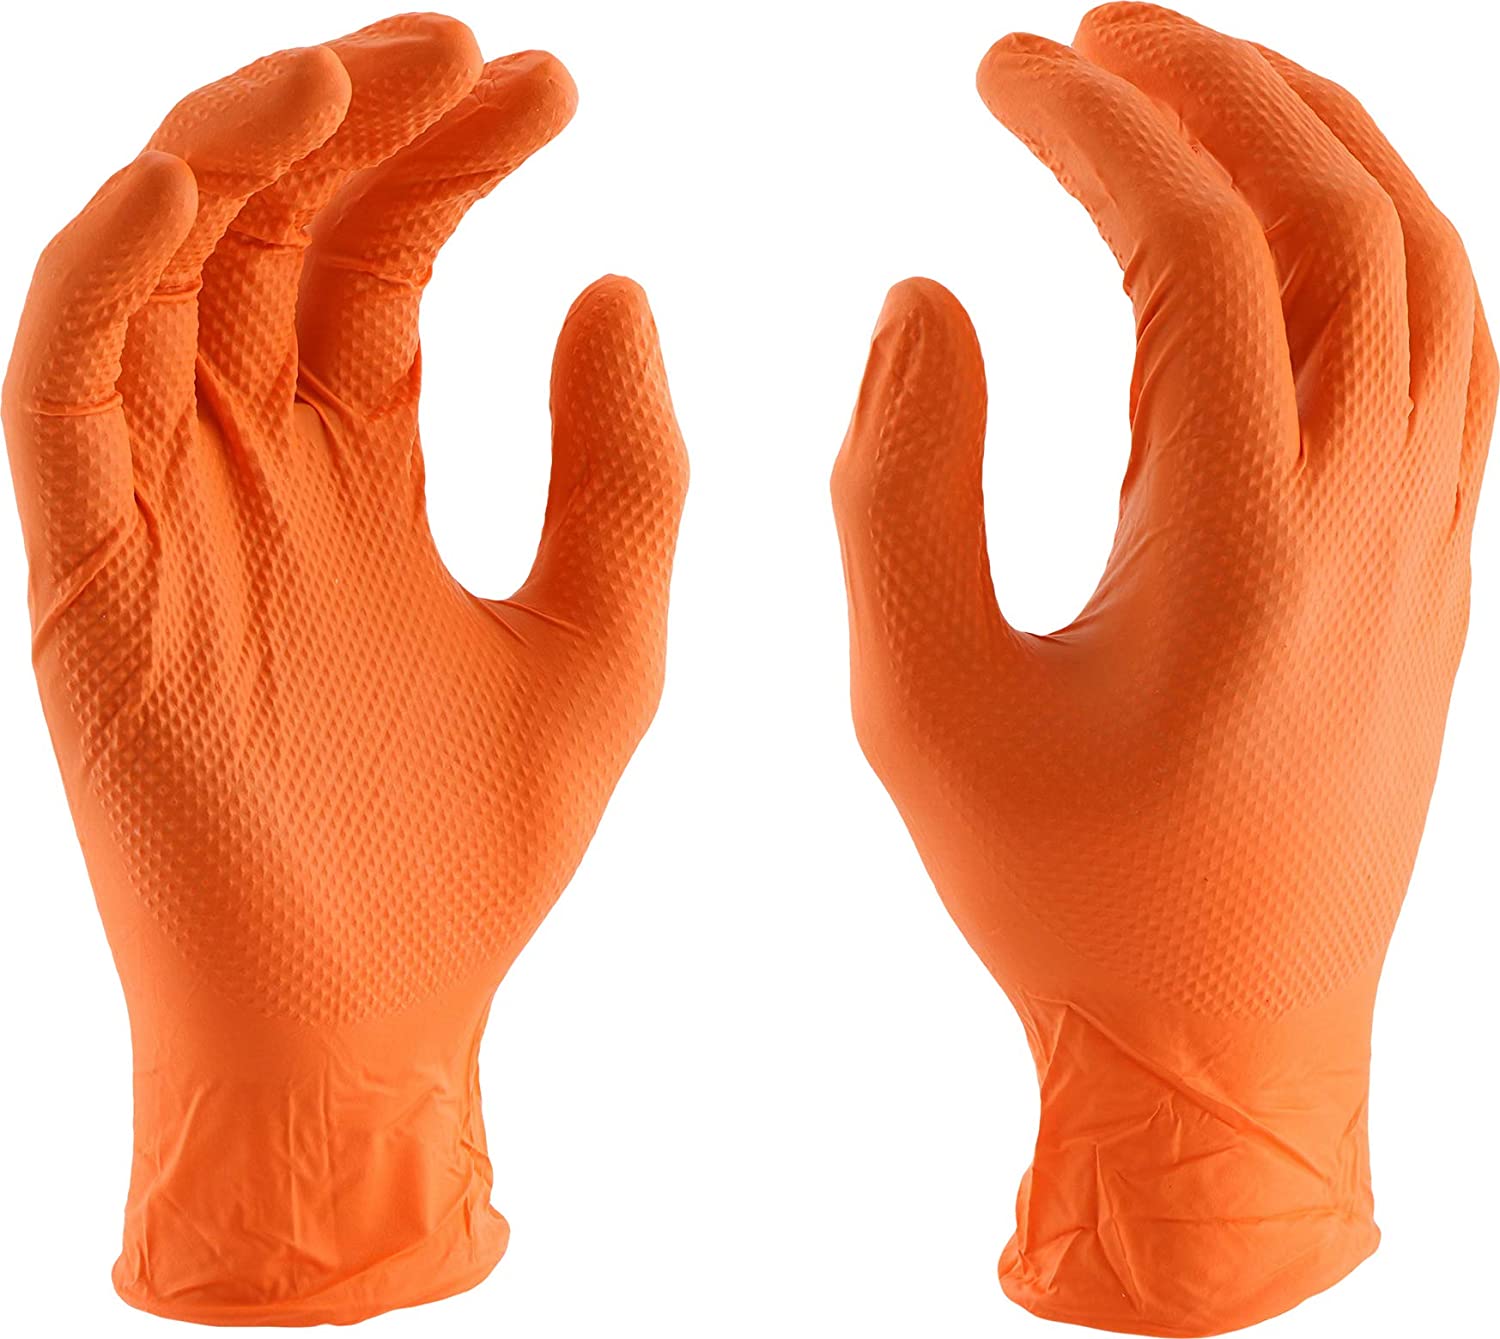 West Chester 2940 Industrial Grade Textured Disposable Nitrile Gloves, 7 mil, Powder Free: Orange, 3X-Large, Box of 100